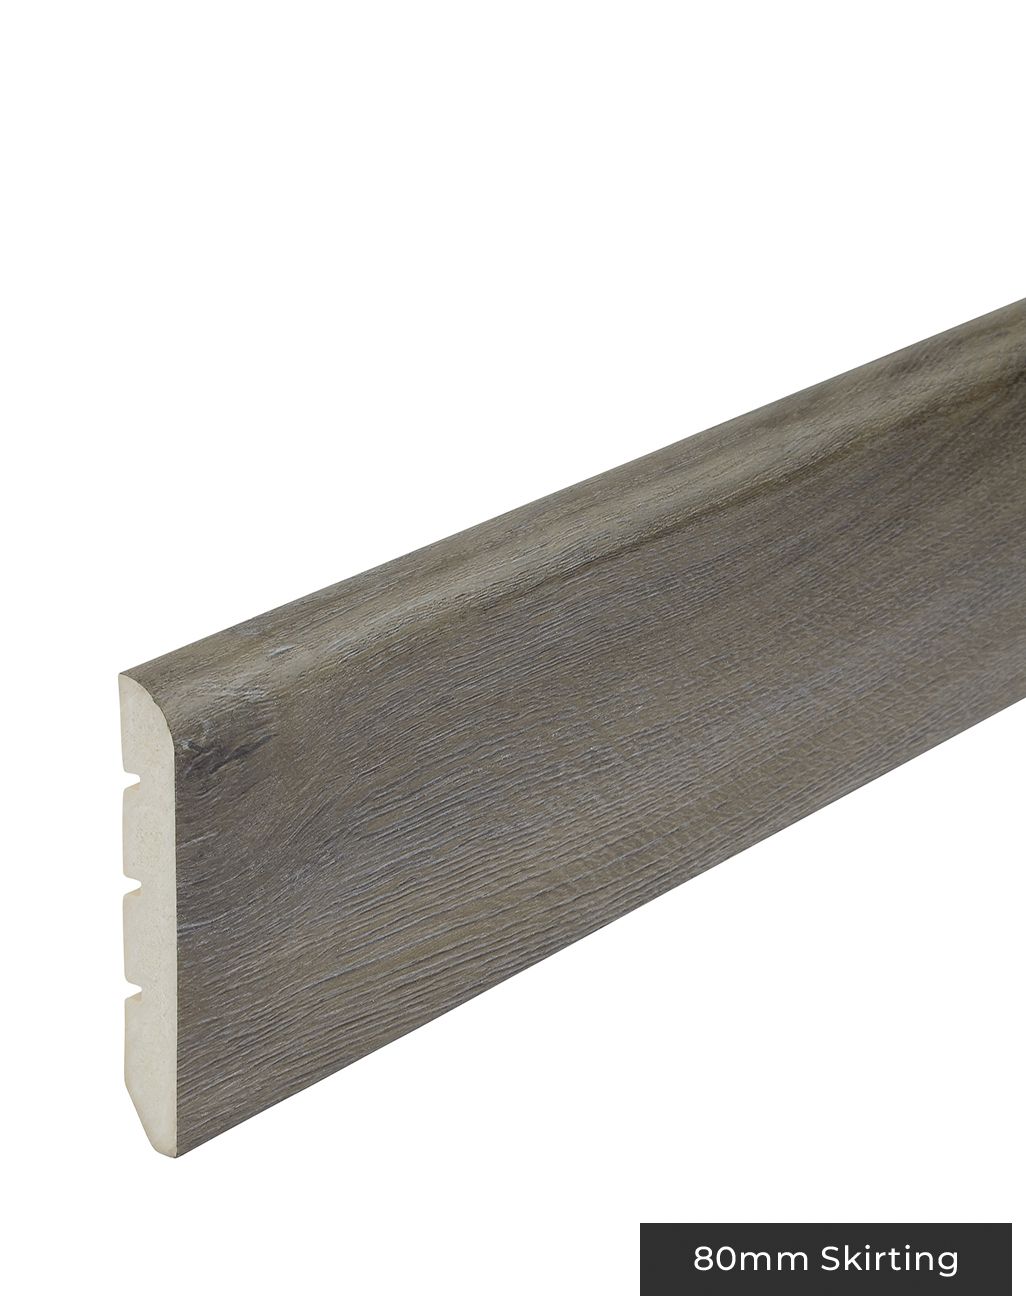 EvoCore Skirting - Weathered Harbour Oak 2